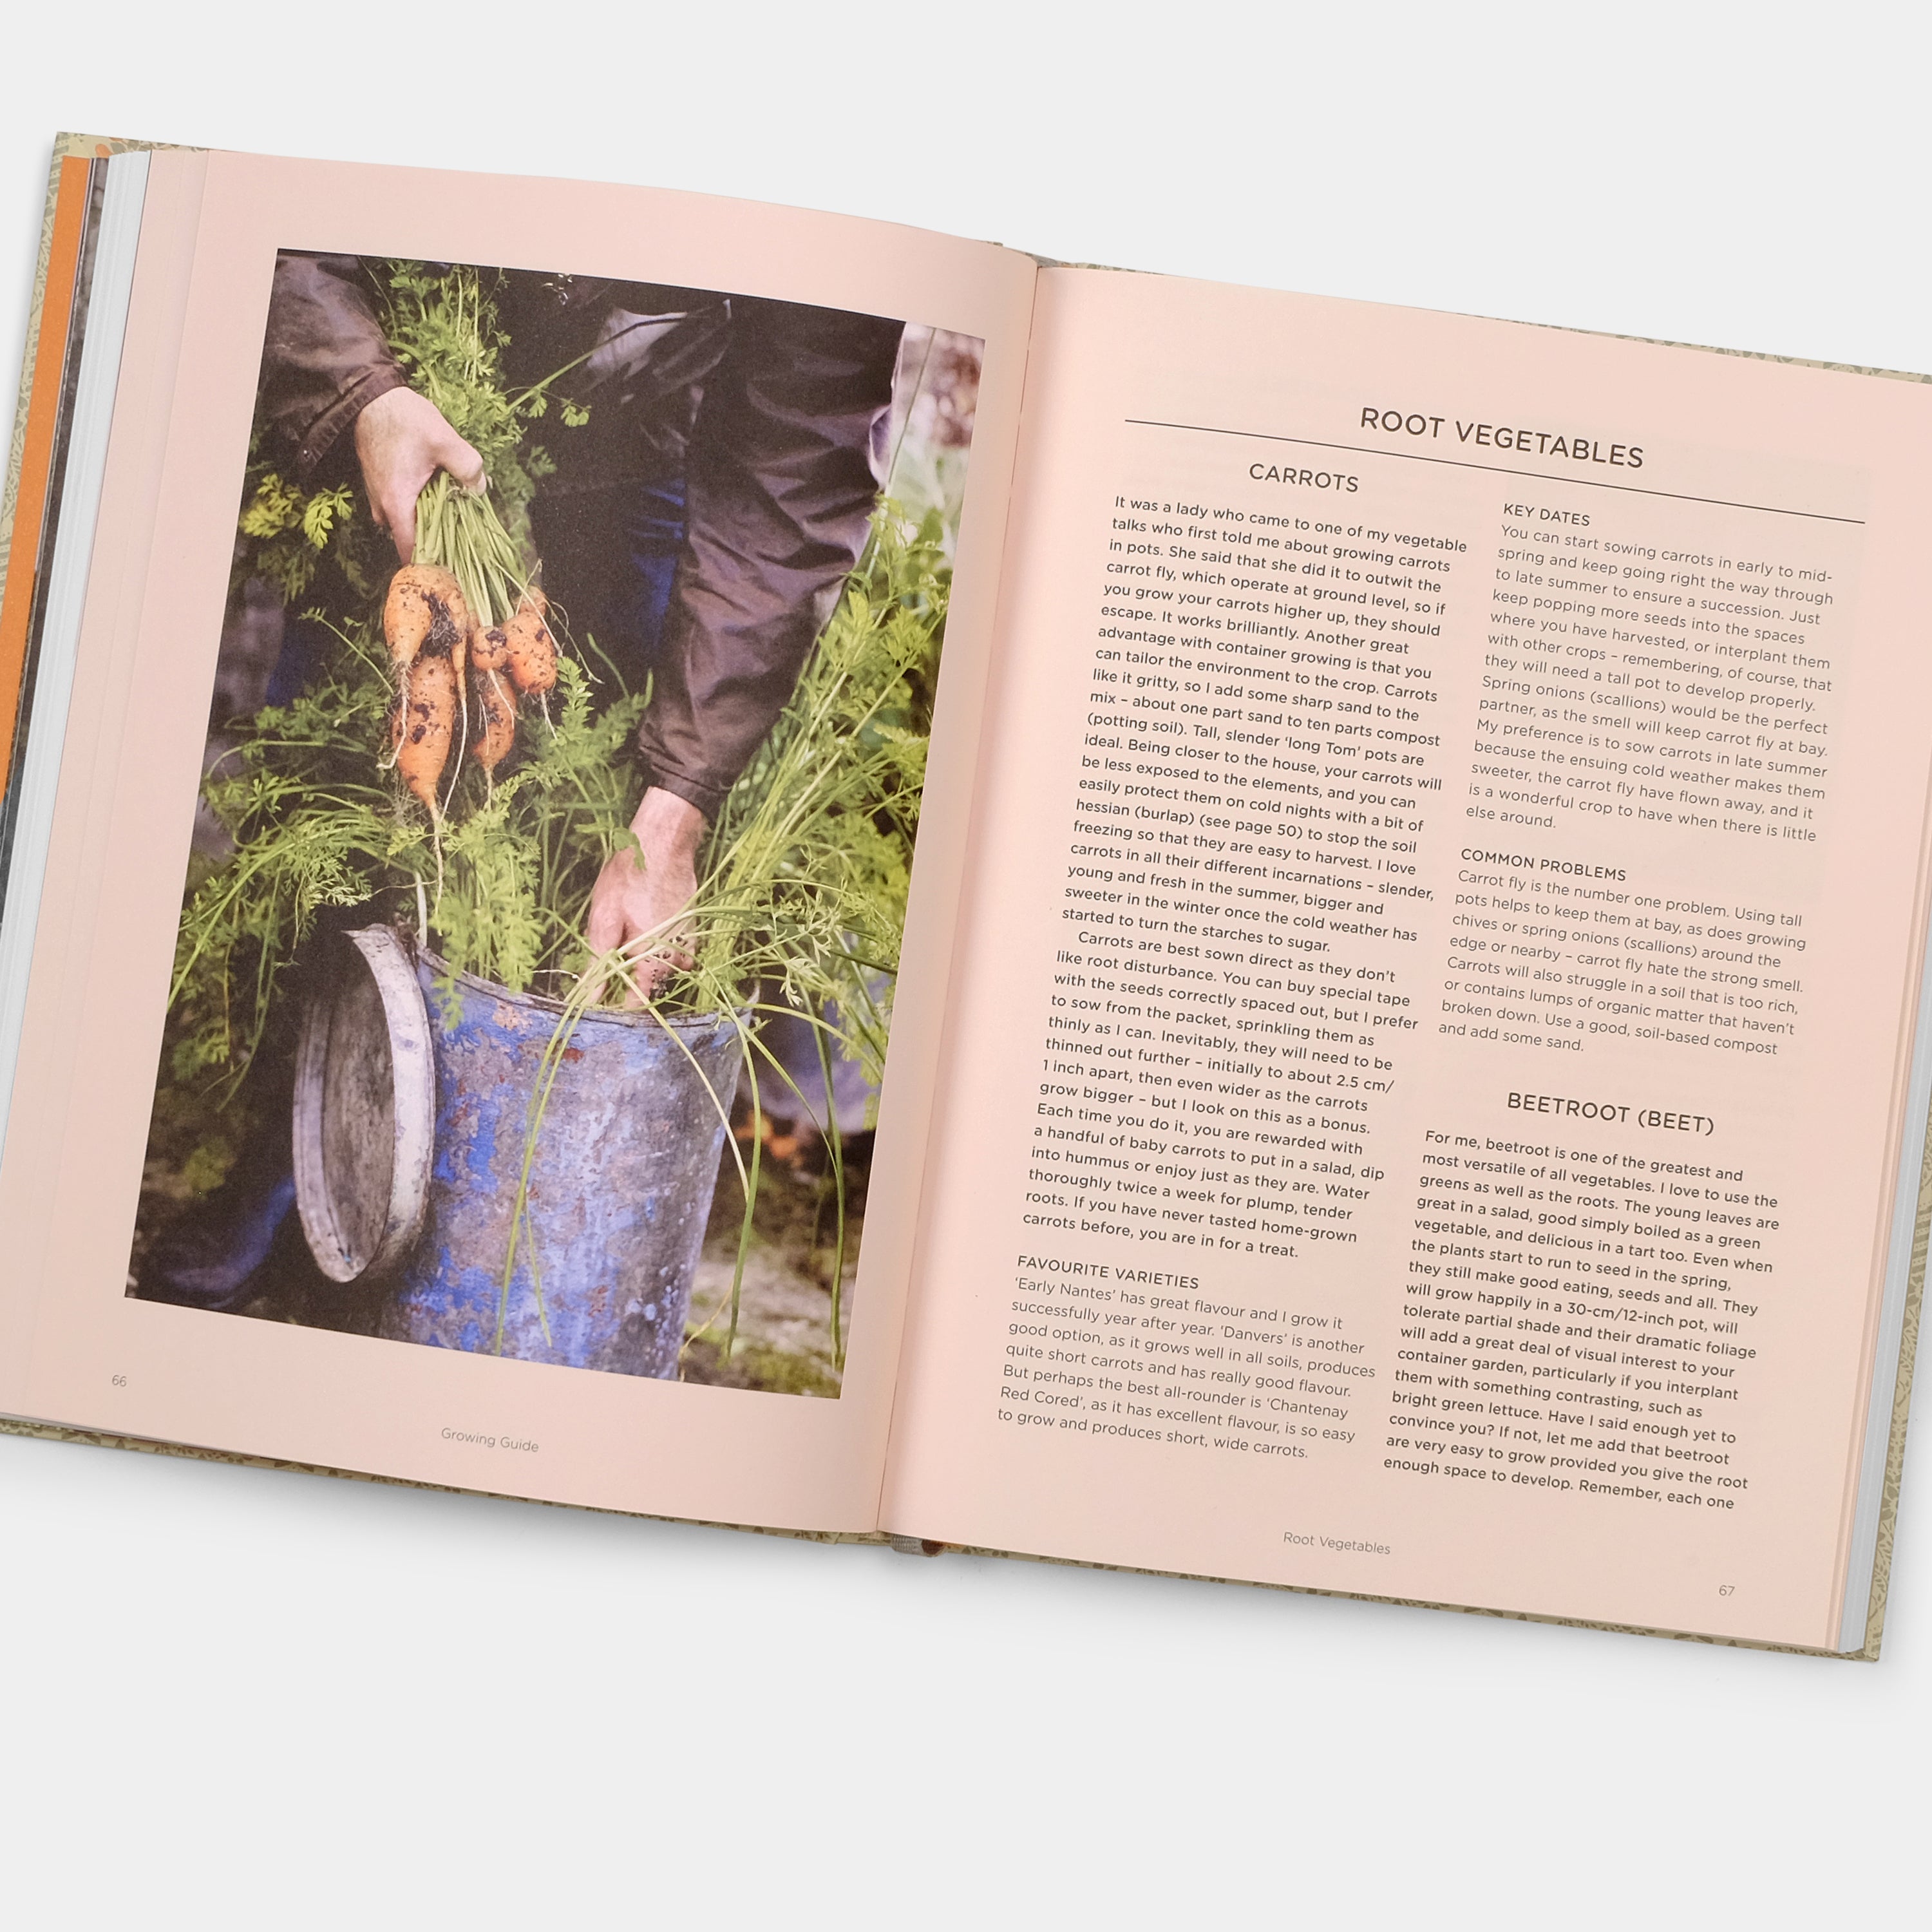 Grow Fruit & Vegetables in Pots: Planting Advice & Recipes from Great Dixter by Aaron Bertelsen Phaidon Book